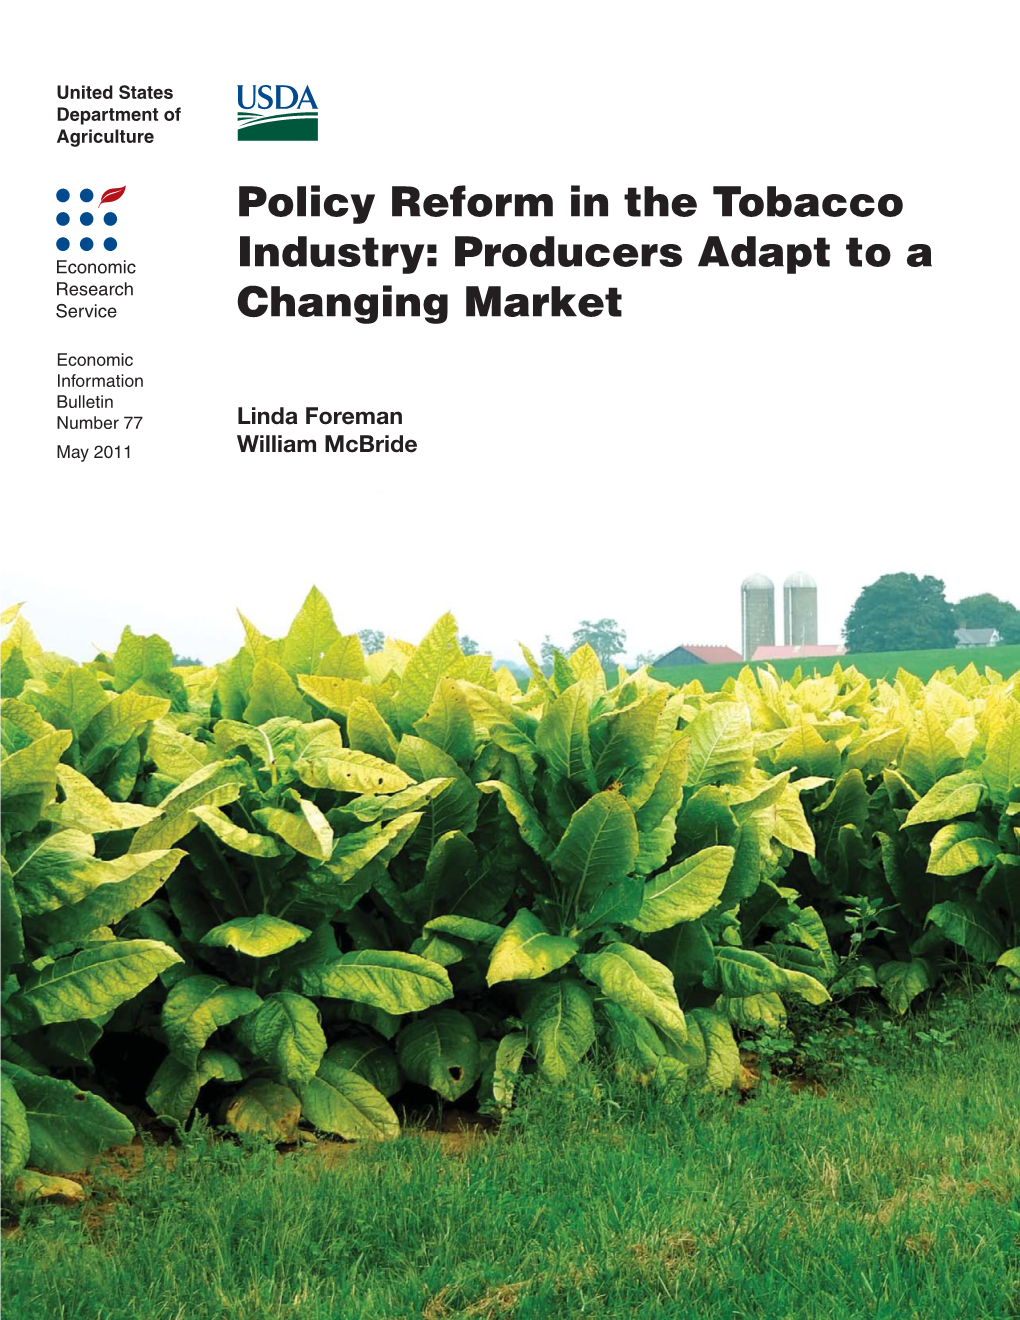 Policy Reform in the Tobacco Industry: Producers Adapt to a Changing Market, EIB-77, U.S